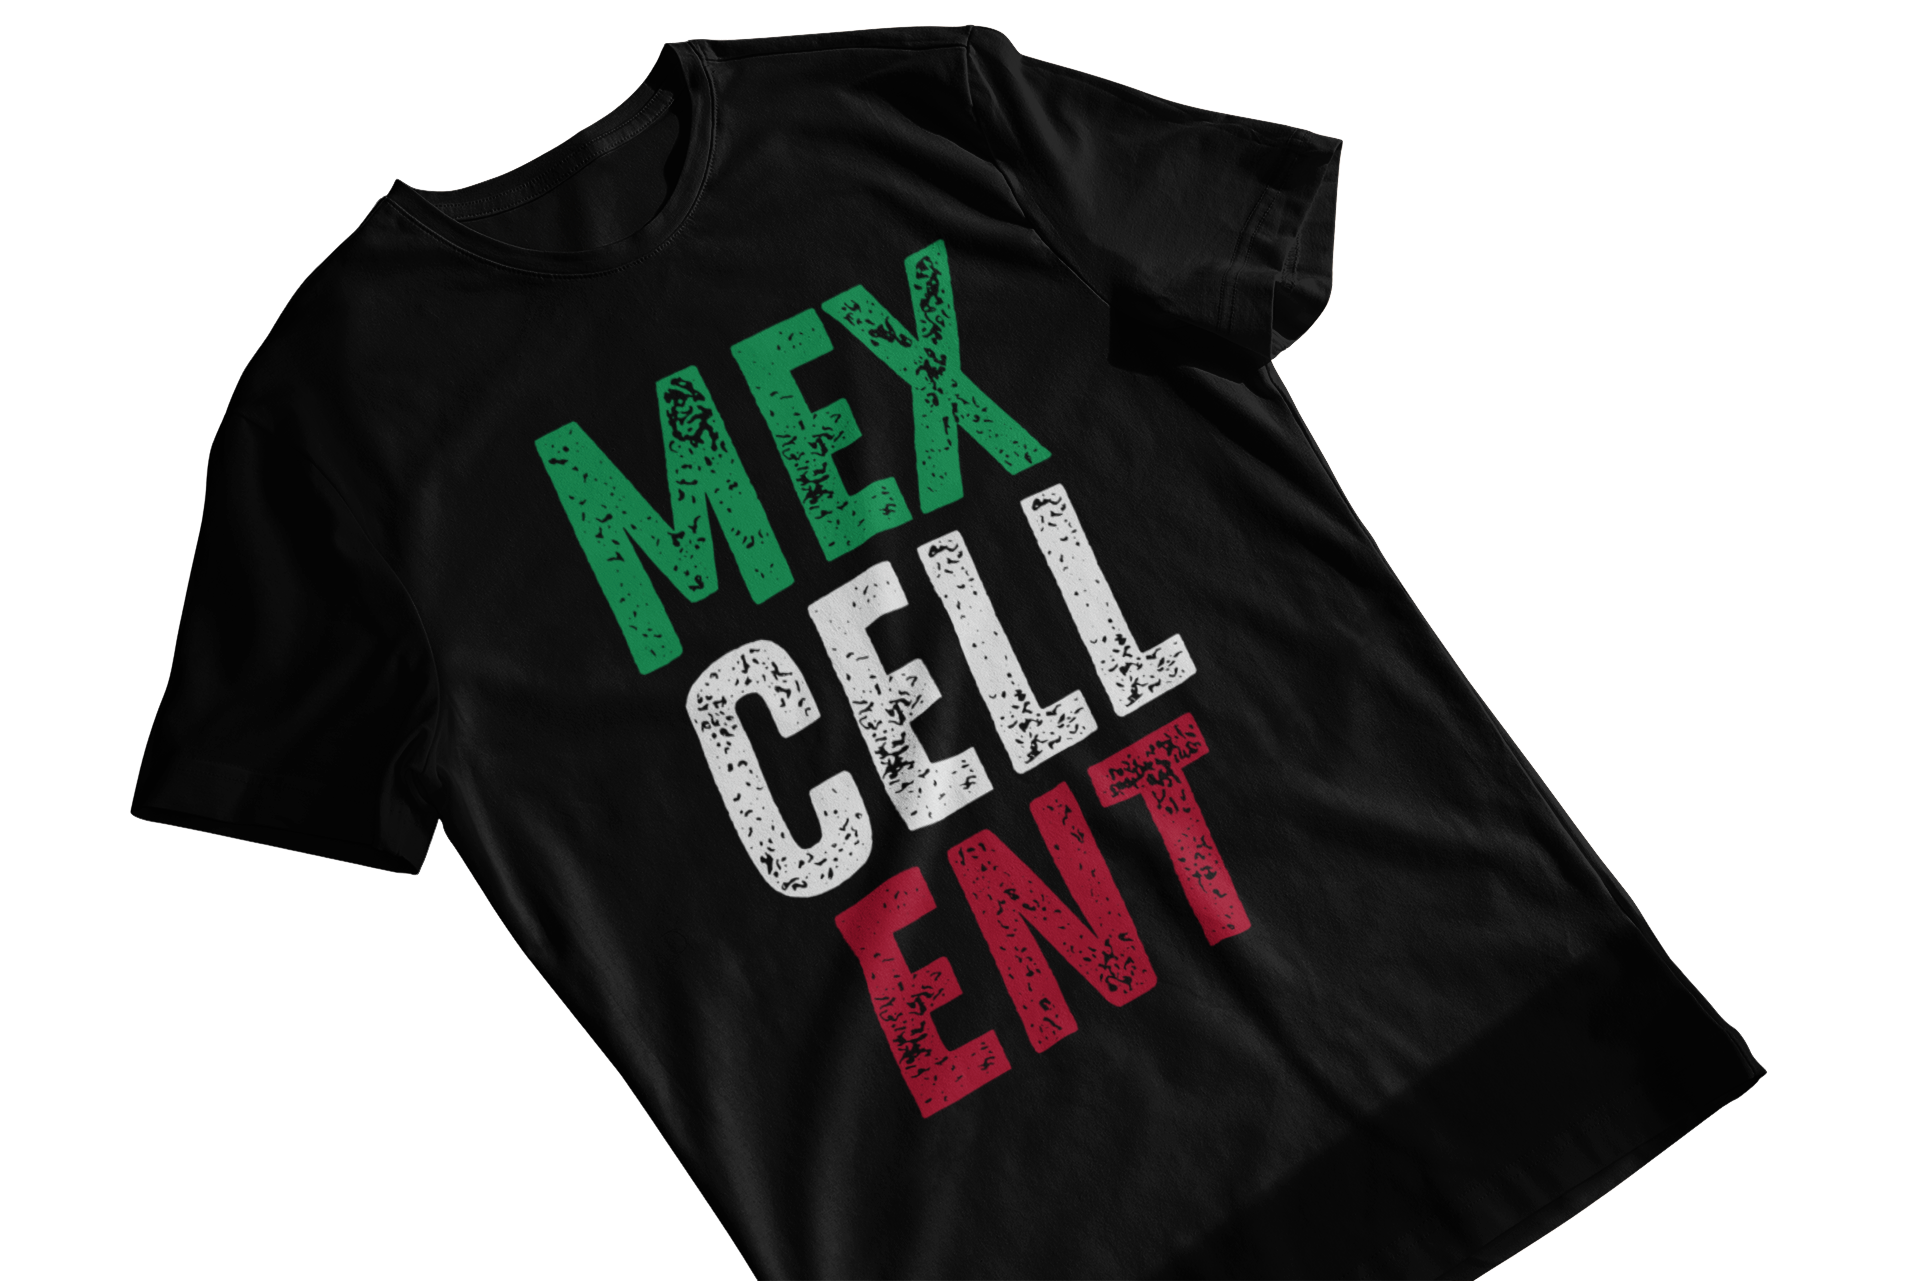 Men's Casual Black T-Shirt with Mexcellent Faded Text in Green, White, and Red Latin-Inspired Graphic Design